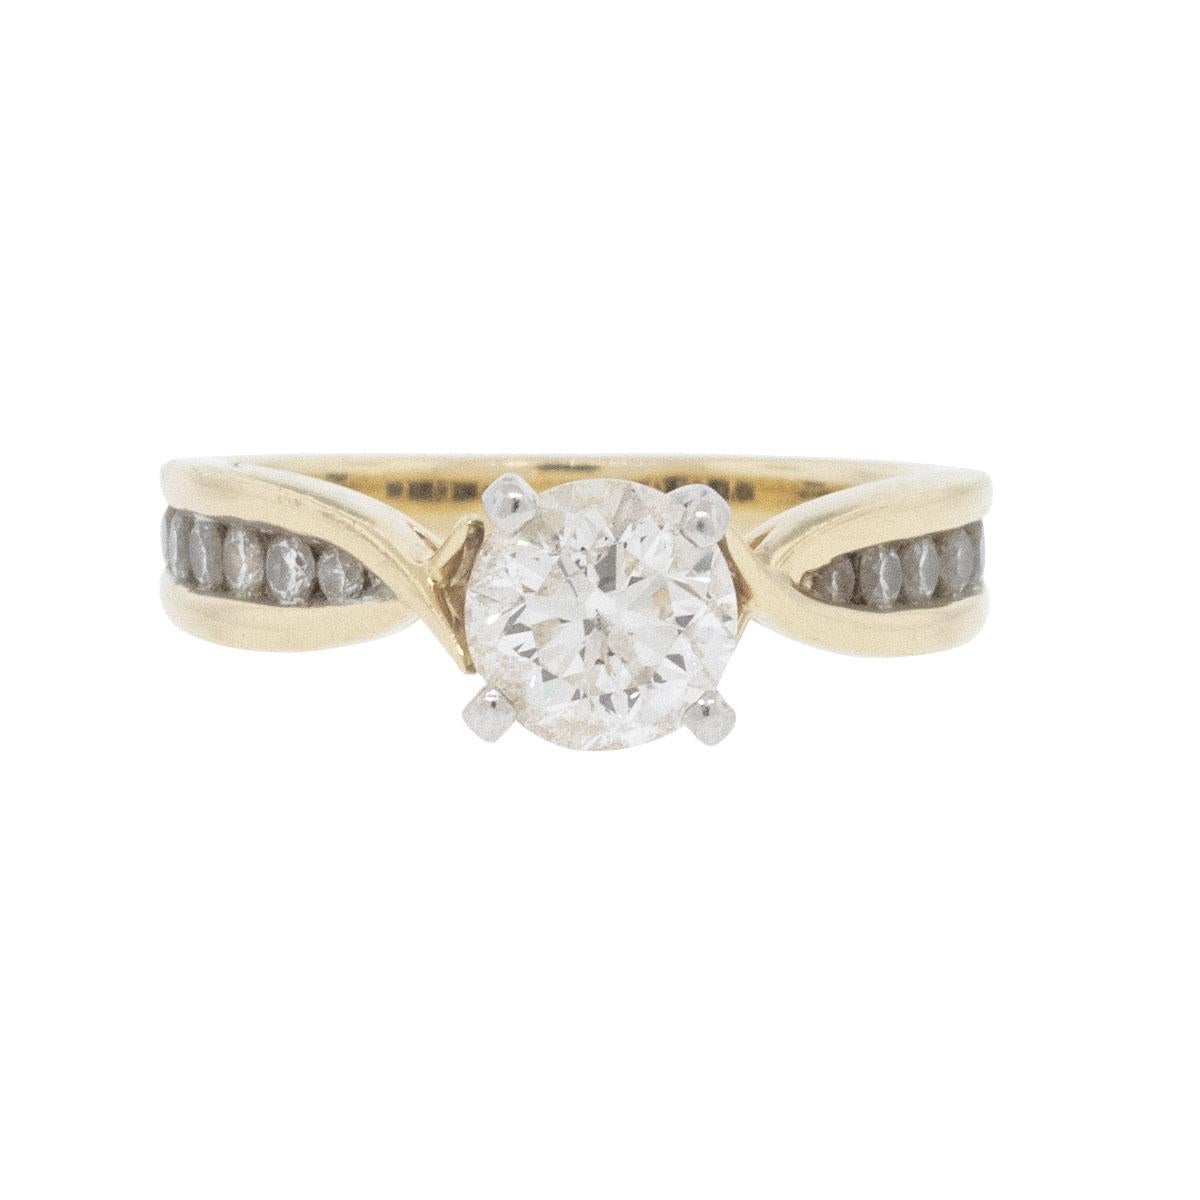 Company: N/A

Style of jewelry: Diamond engagement Ring

Material: 14k yellow gold

Stones: Center stone approximately 6.61mm and approximately J in color and I1 in clarity

Dimensions: 20mm x 6.61mm x 27mm

Weight: 5.1g (3.3dwt)

SKU: 12453-1